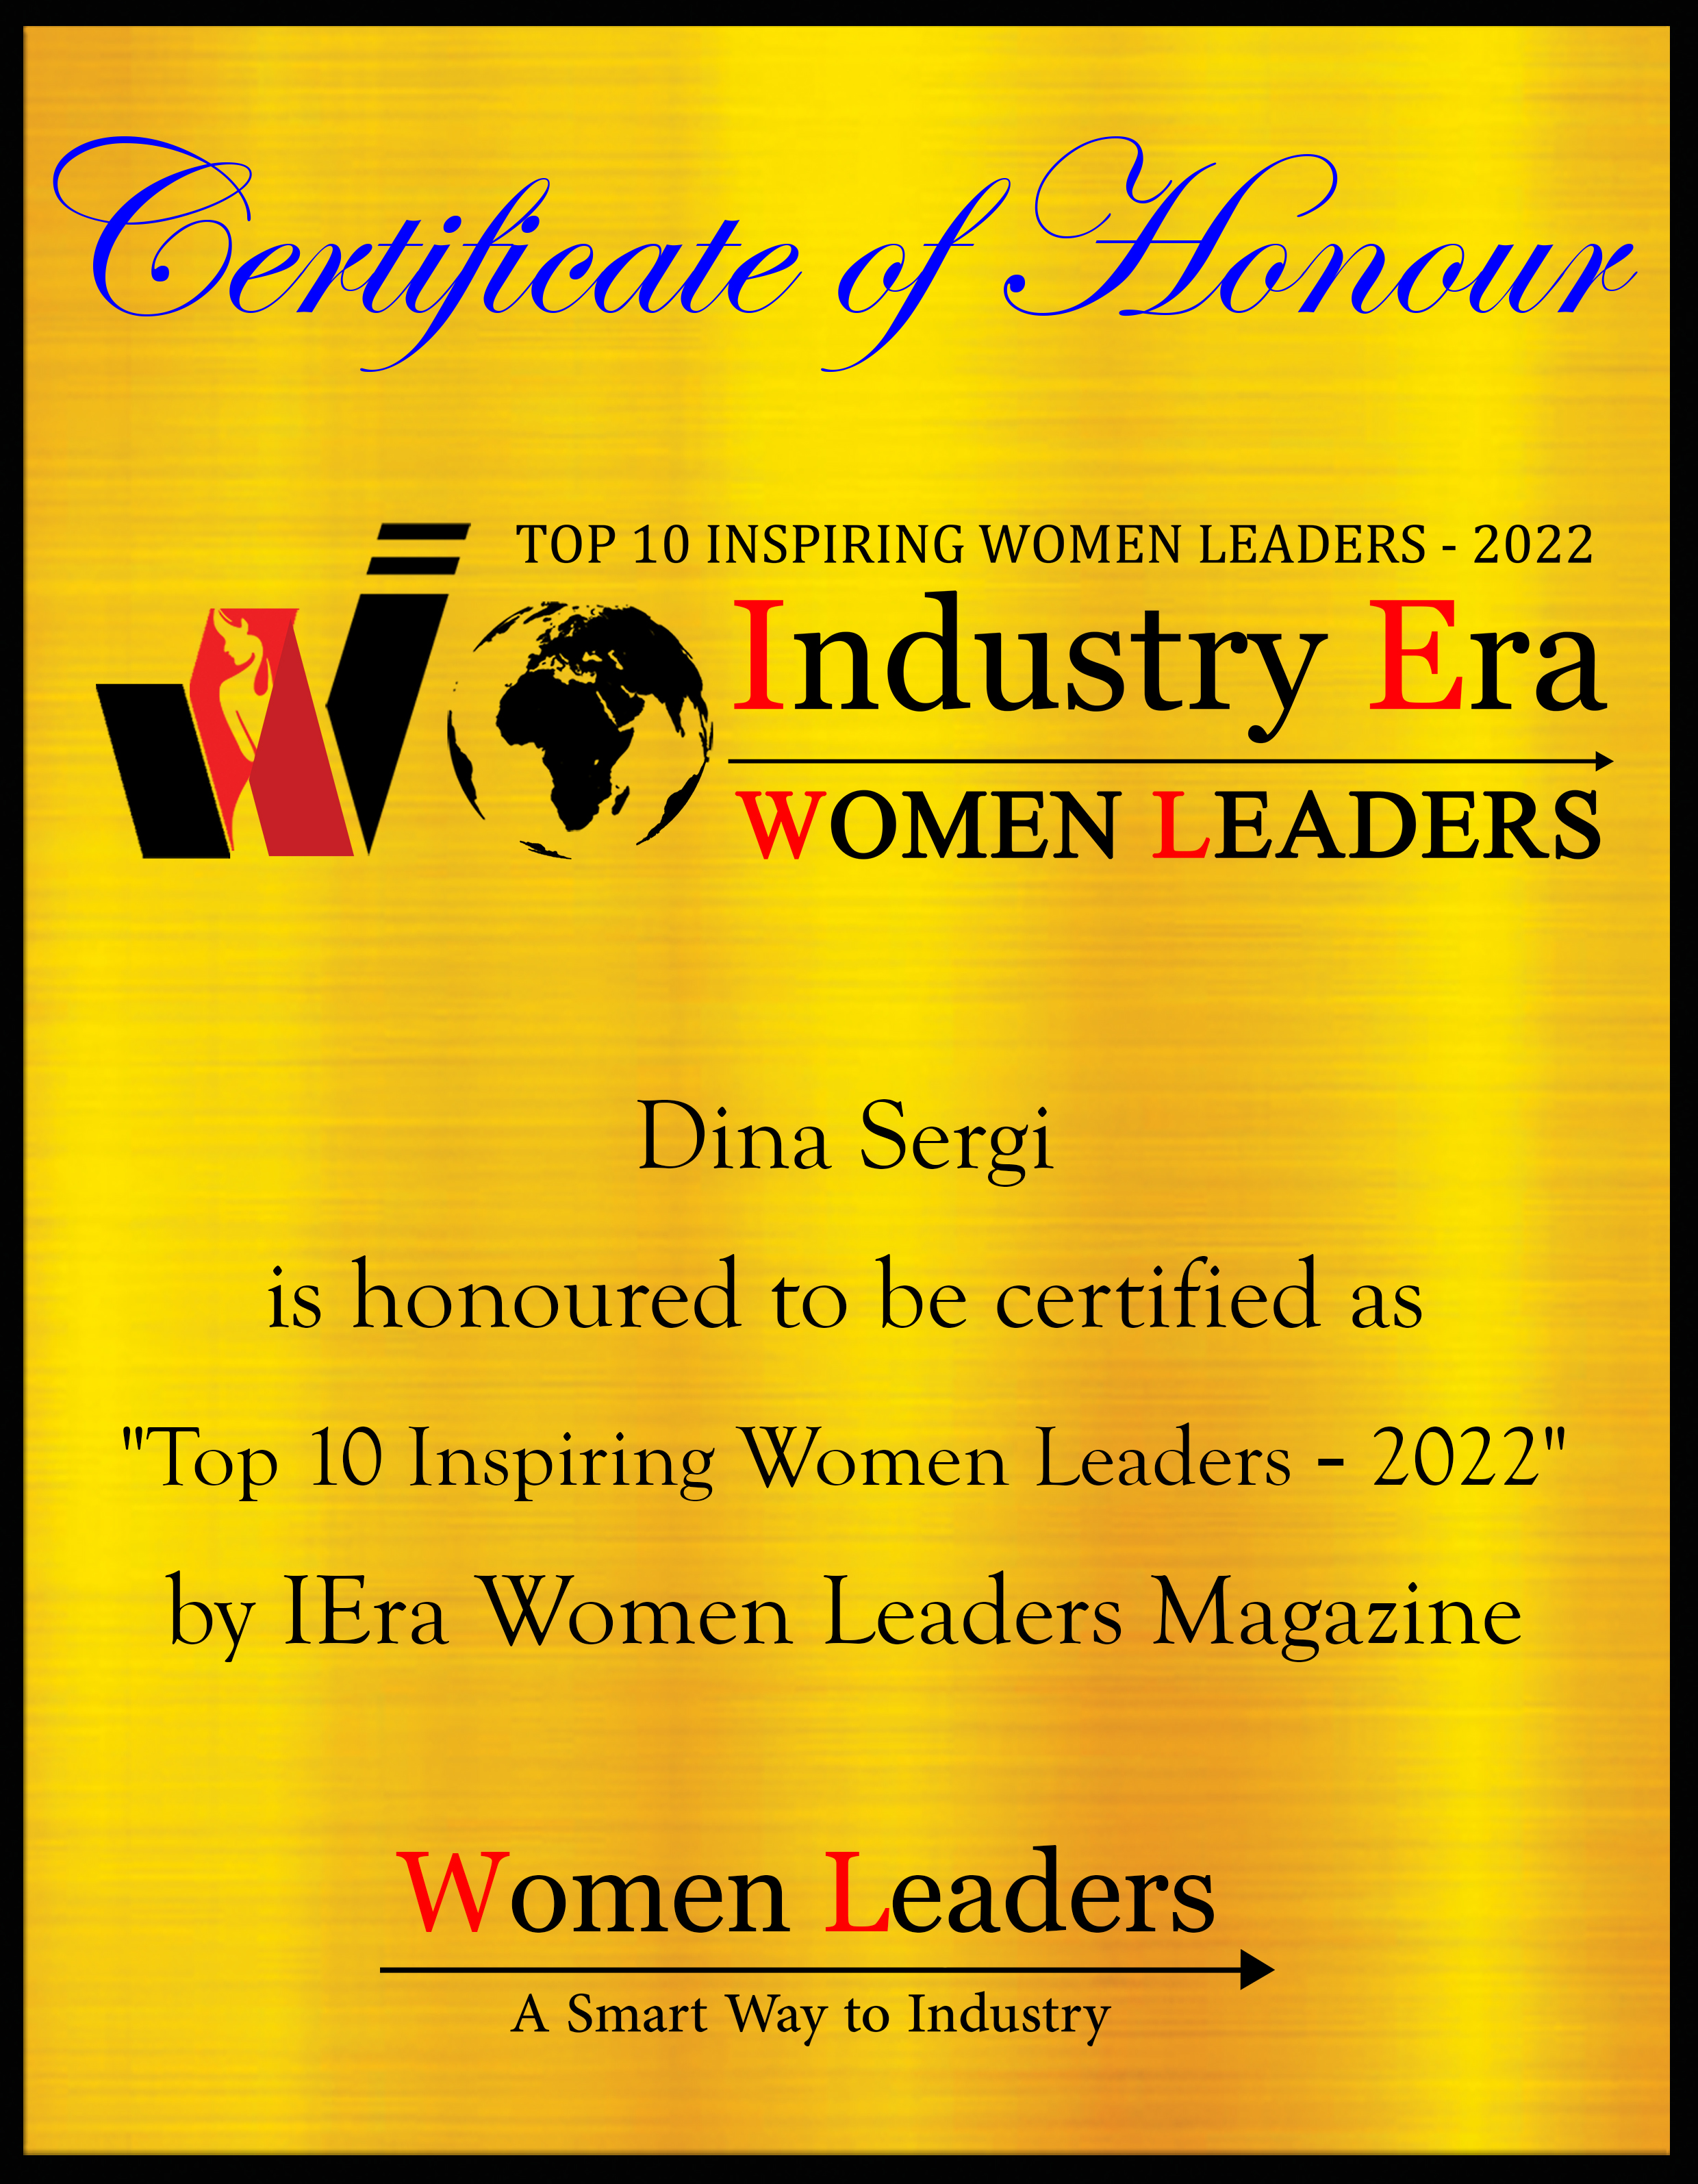 Dina Sergi, Vice President of Operations at MyHealth Centre, Top 10 Inspiring Women Leaders of 2022